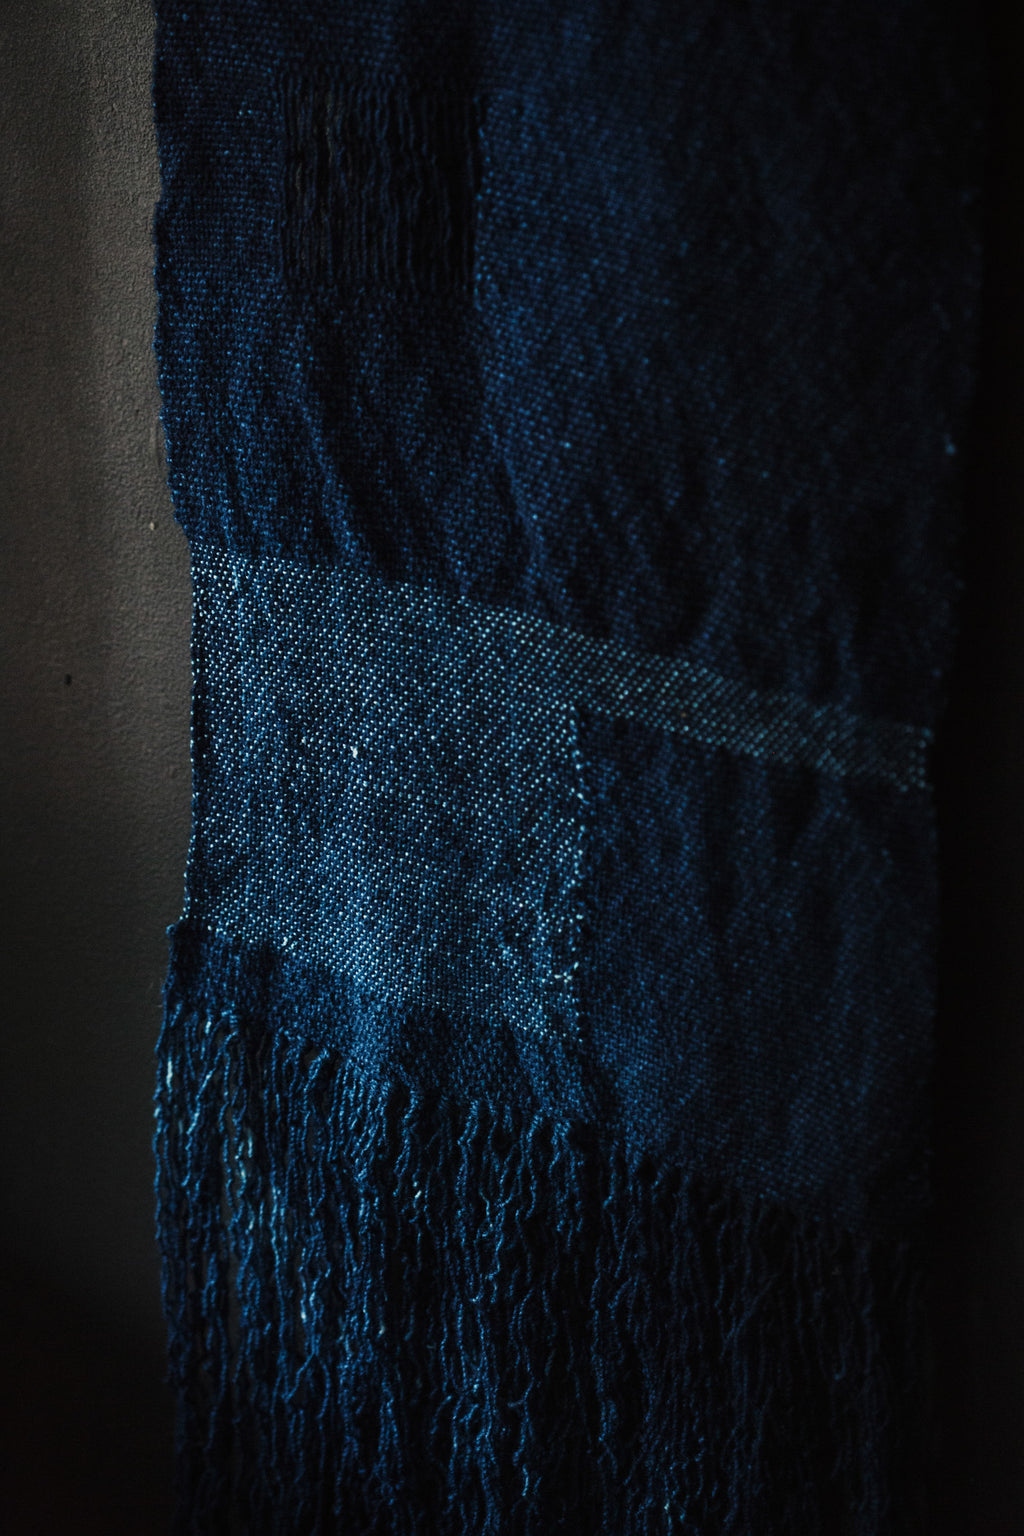 Hand-Dyed Linen / Wool Indigo Tapestry